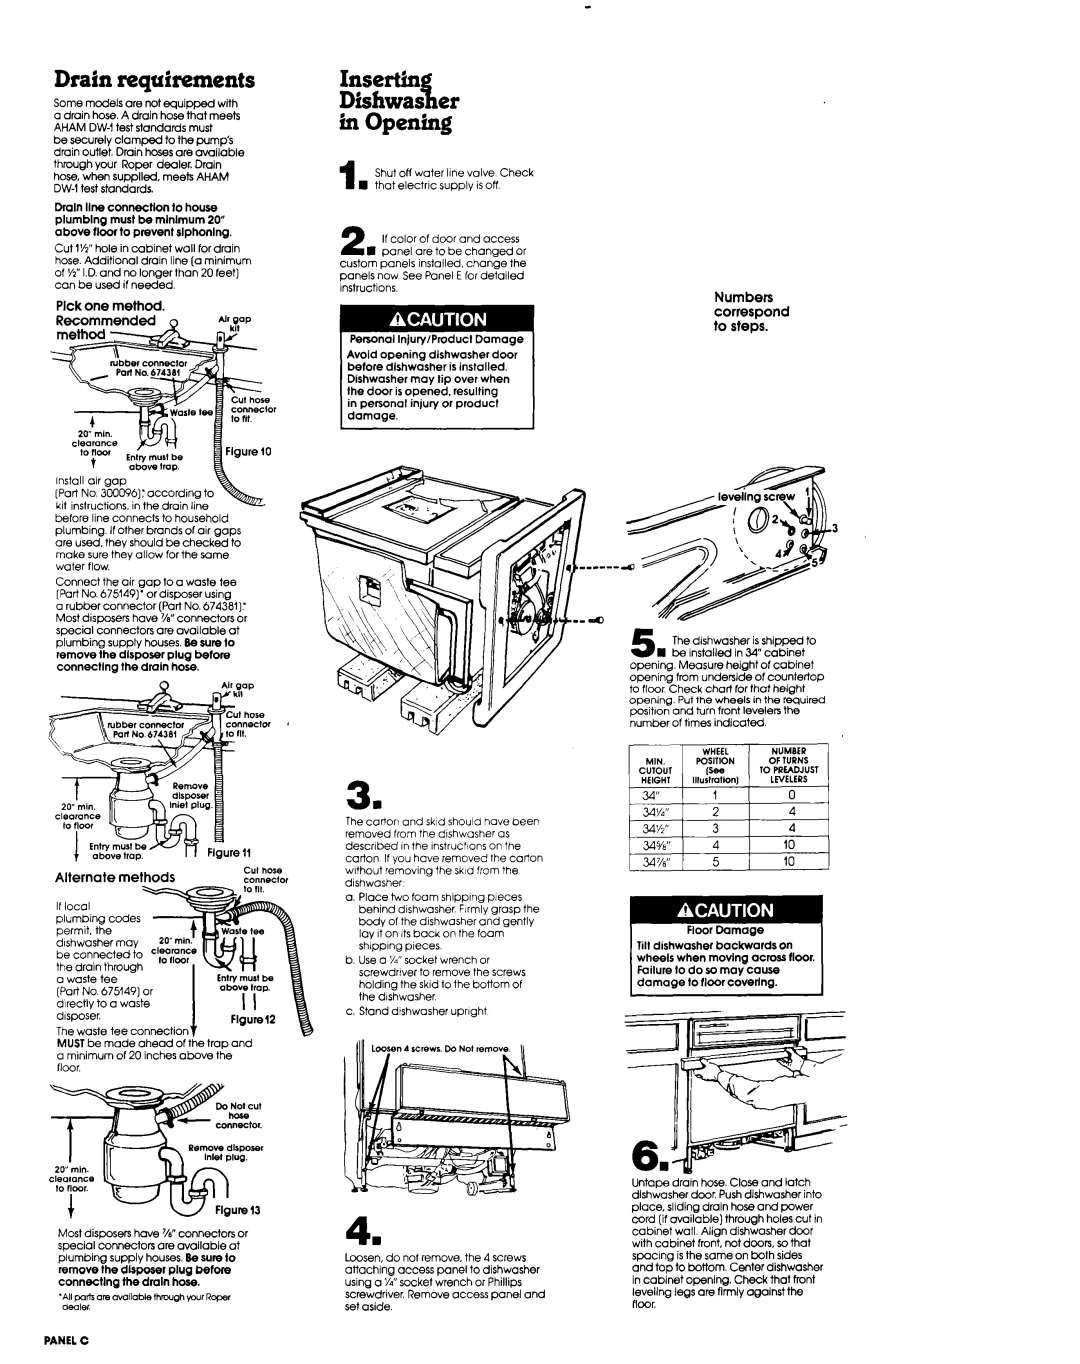 Roper Dishwasher installation instructions Drain requirements, Insertin Dishwas%er in Opening, Recommended 